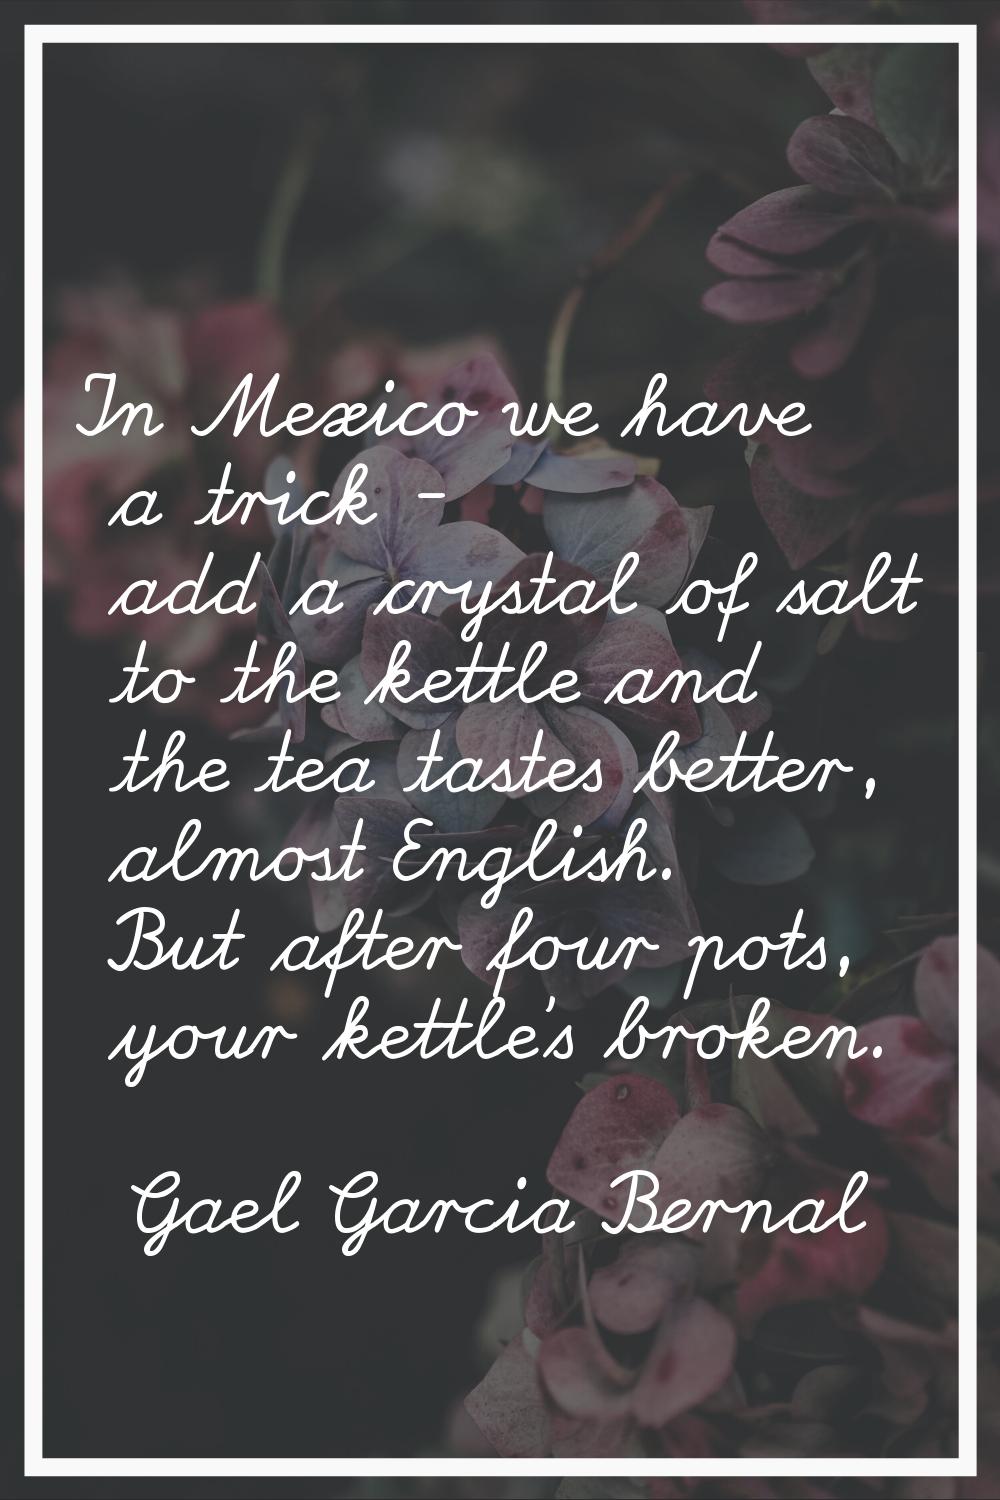 In Mexico we have a trick - add a crystal of salt to the kettle and the tea tastes better, almost E